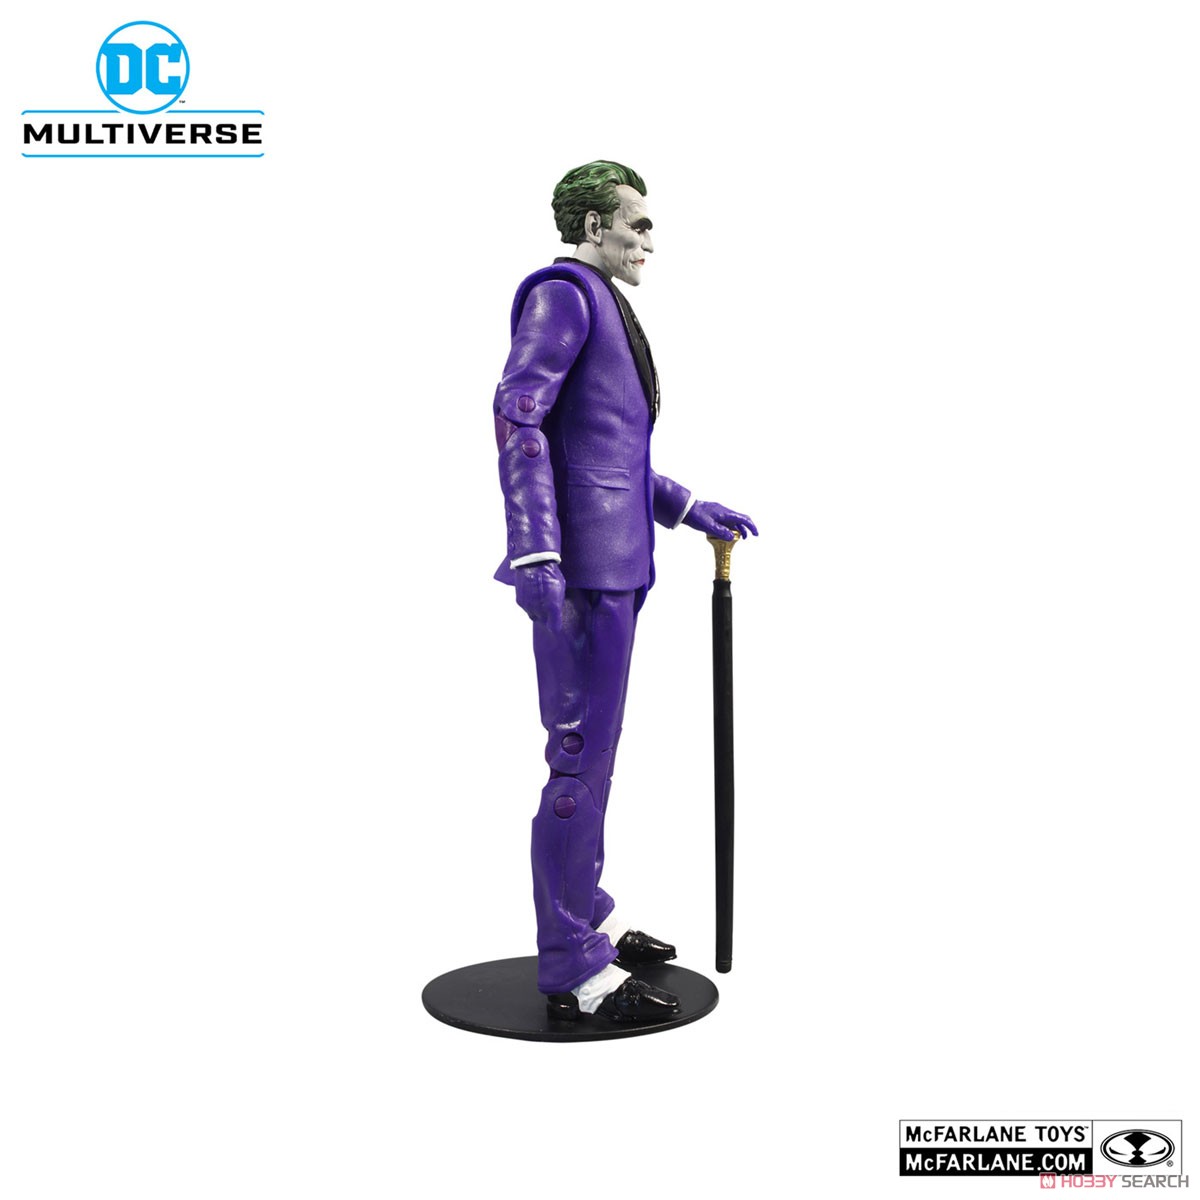 DC Comics - DC Multiverse: 7 Inch Action Figure - #087 The Joker (The Criminal) [Comic / Batman: Three Jokers] (Completed) Item picture4